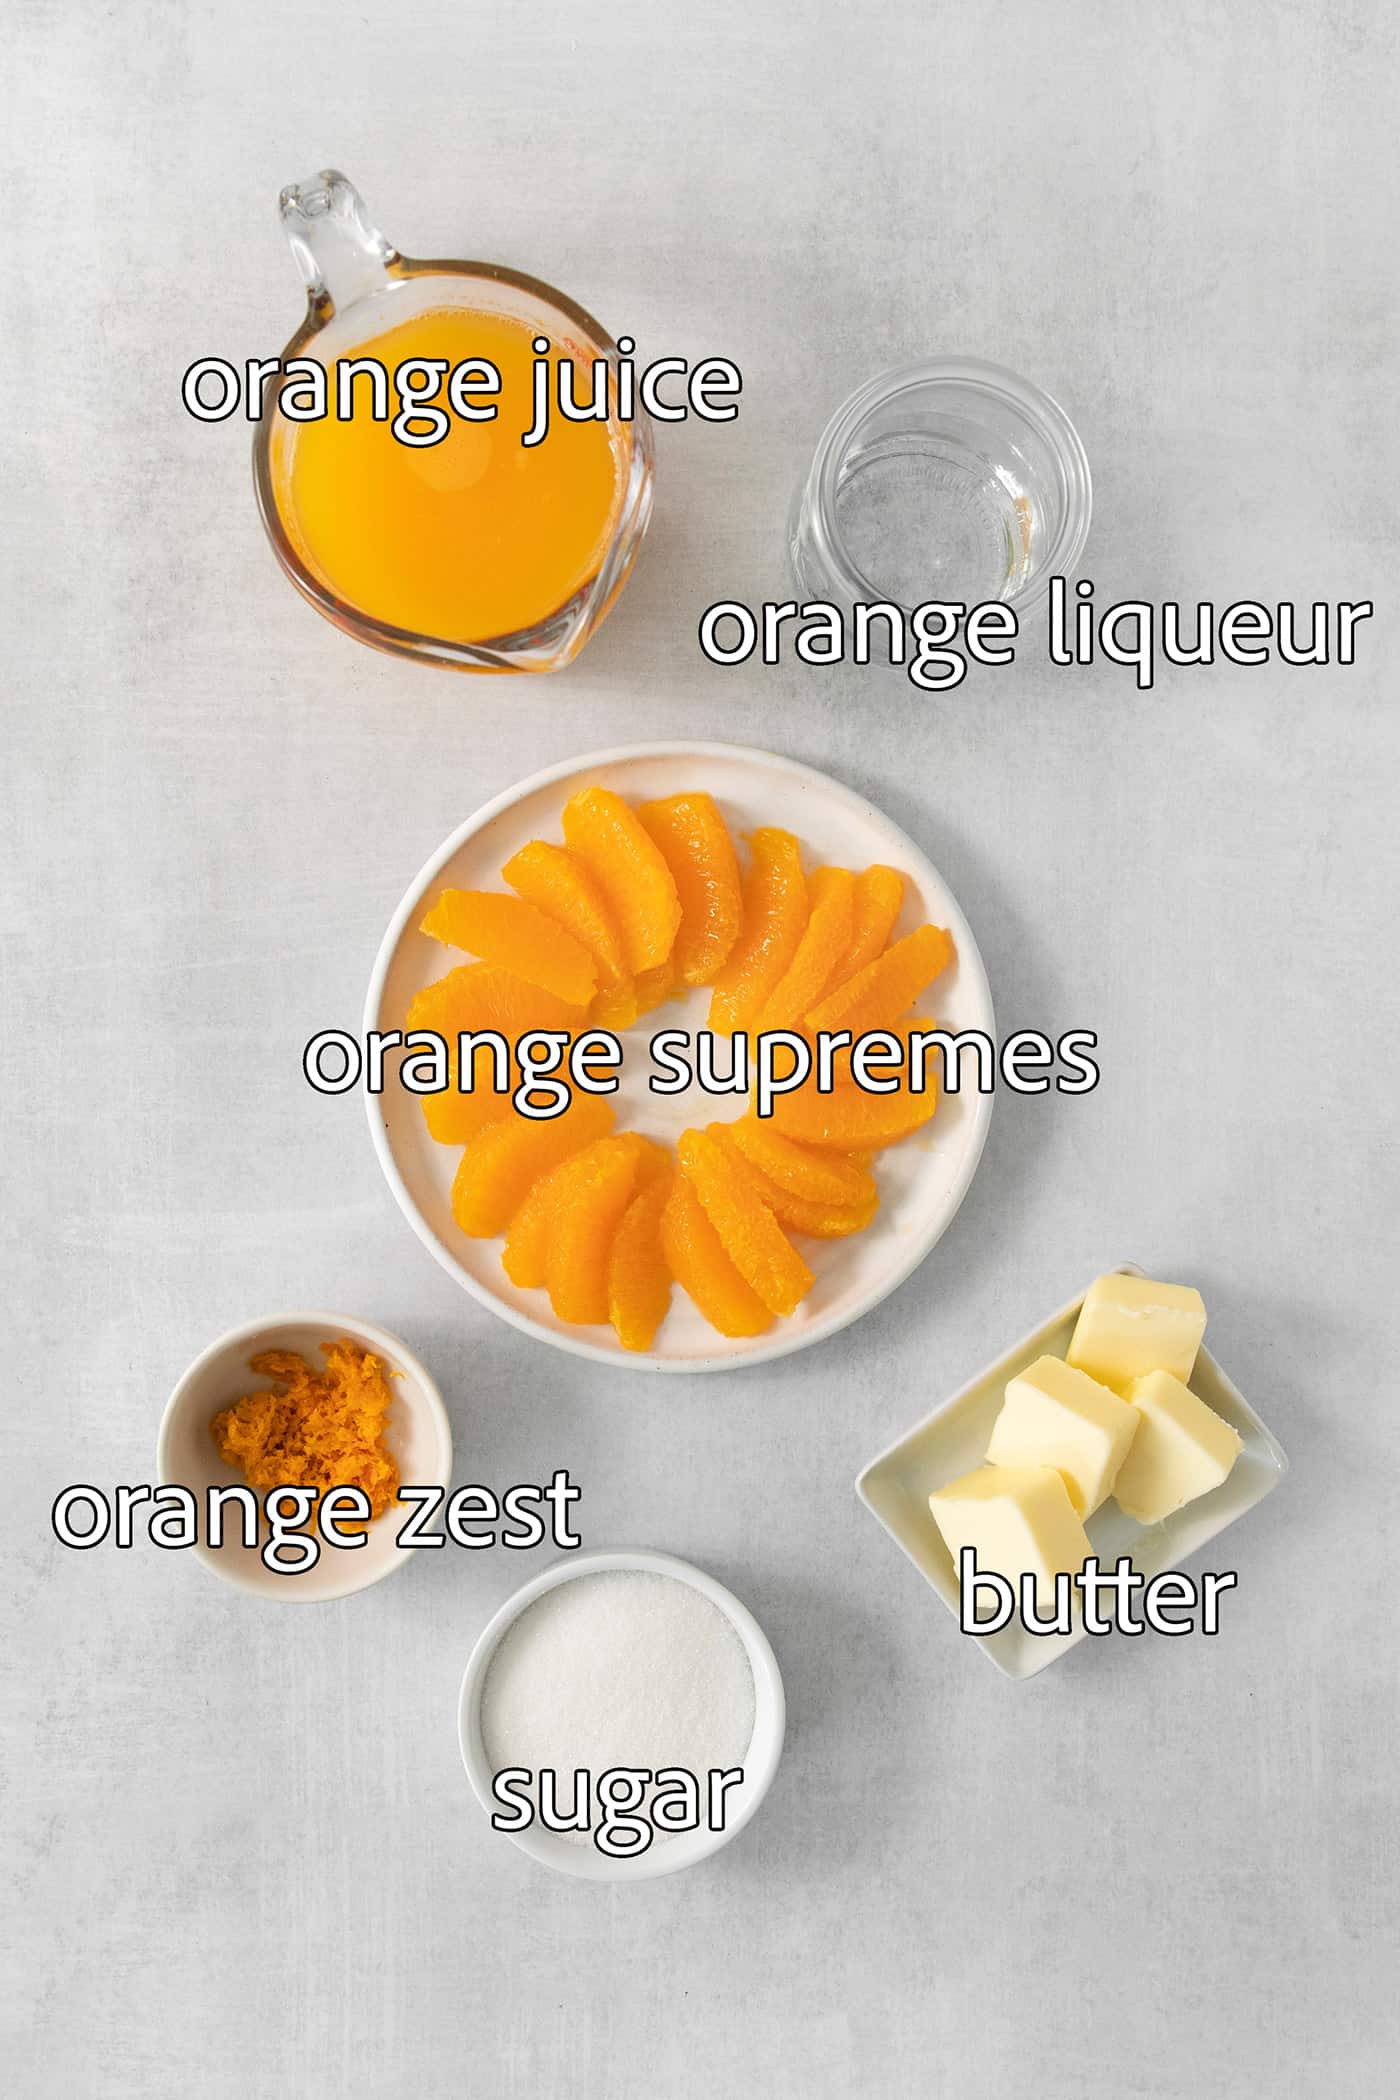 The ingredients for the orange sauce are shown labeled and portioned out: butter, orange segments, orange juice, orange zest, sugar,